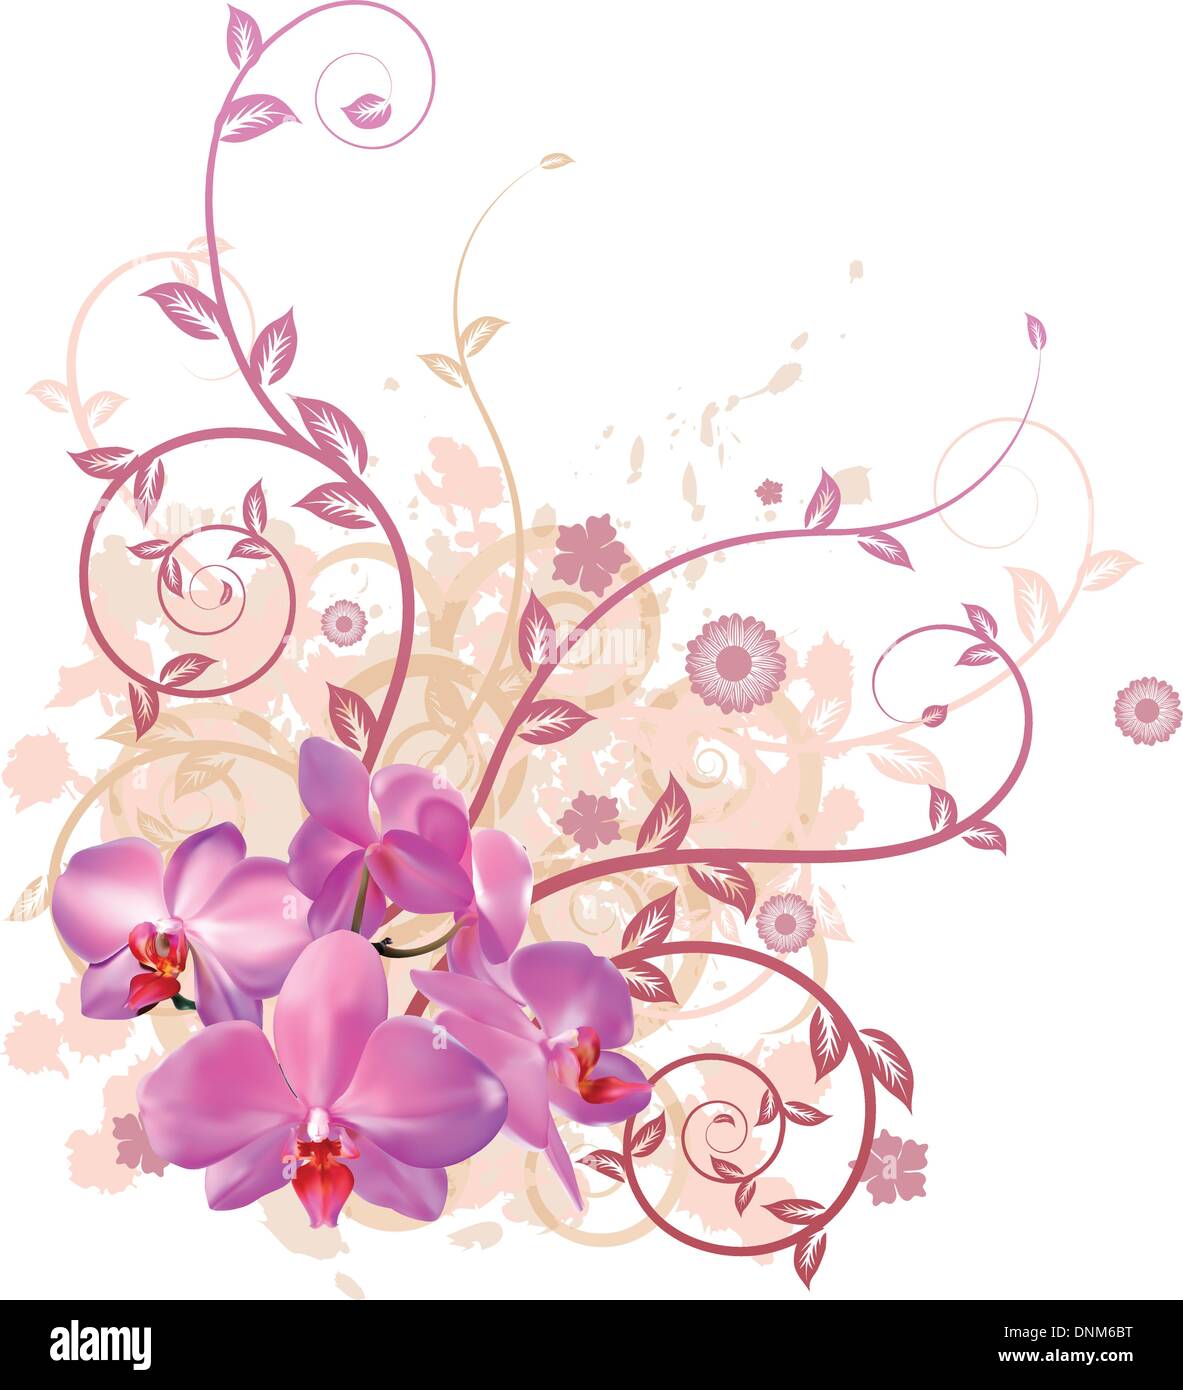 A very stylish vector floral background illustration with pink orchid flowers. Stock Vector